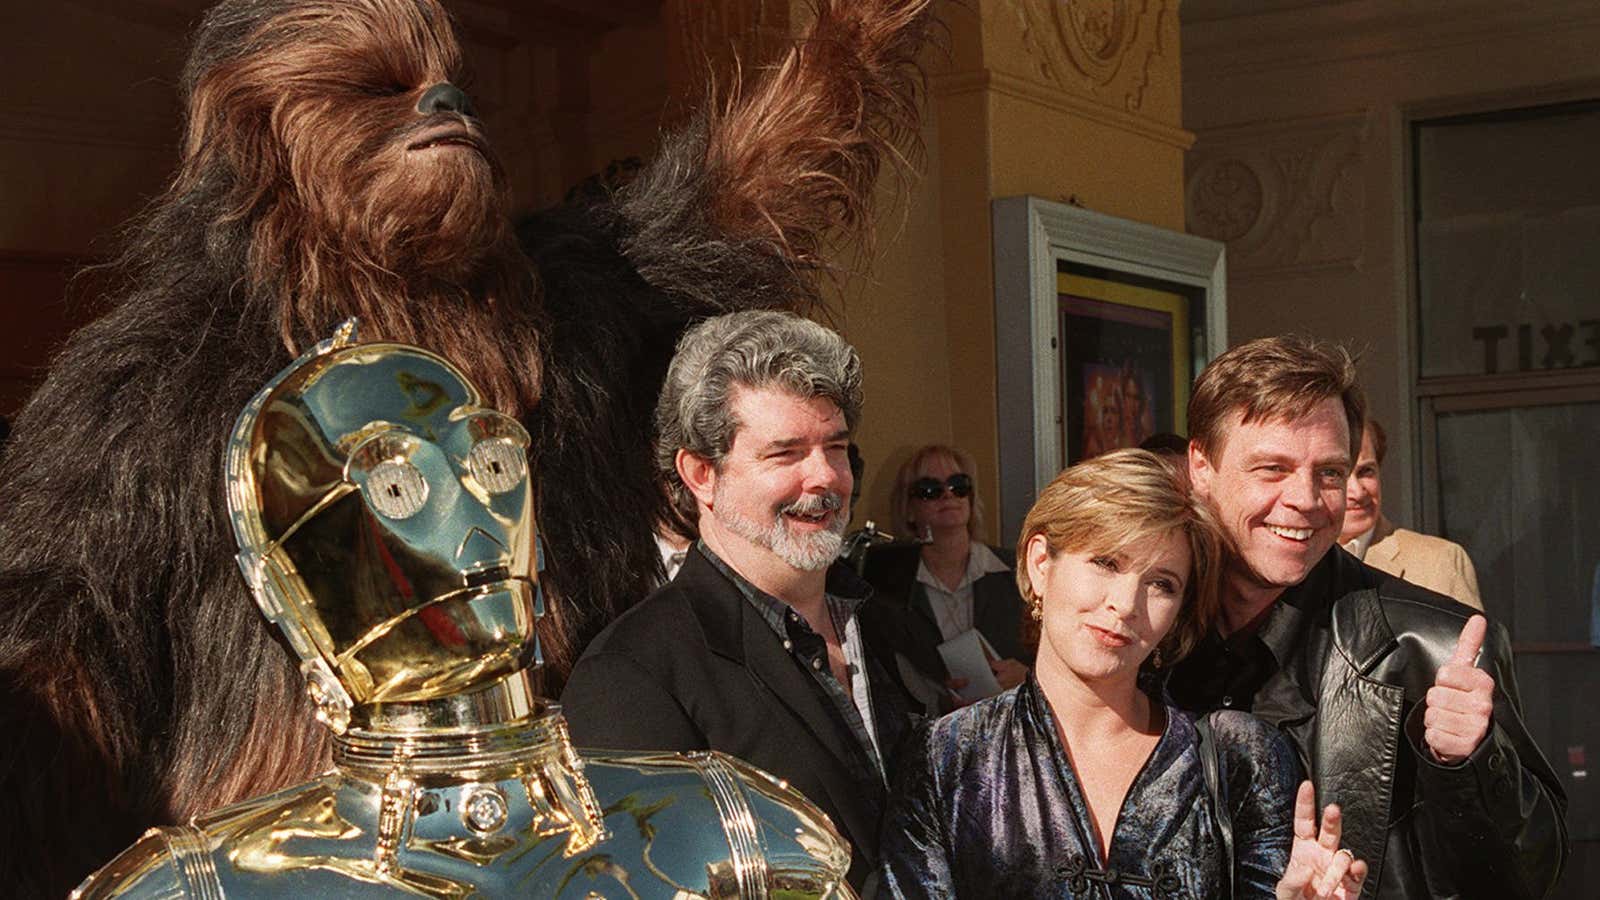 Carrie Fisher, aka Princess Leia, and her interstellar friends.